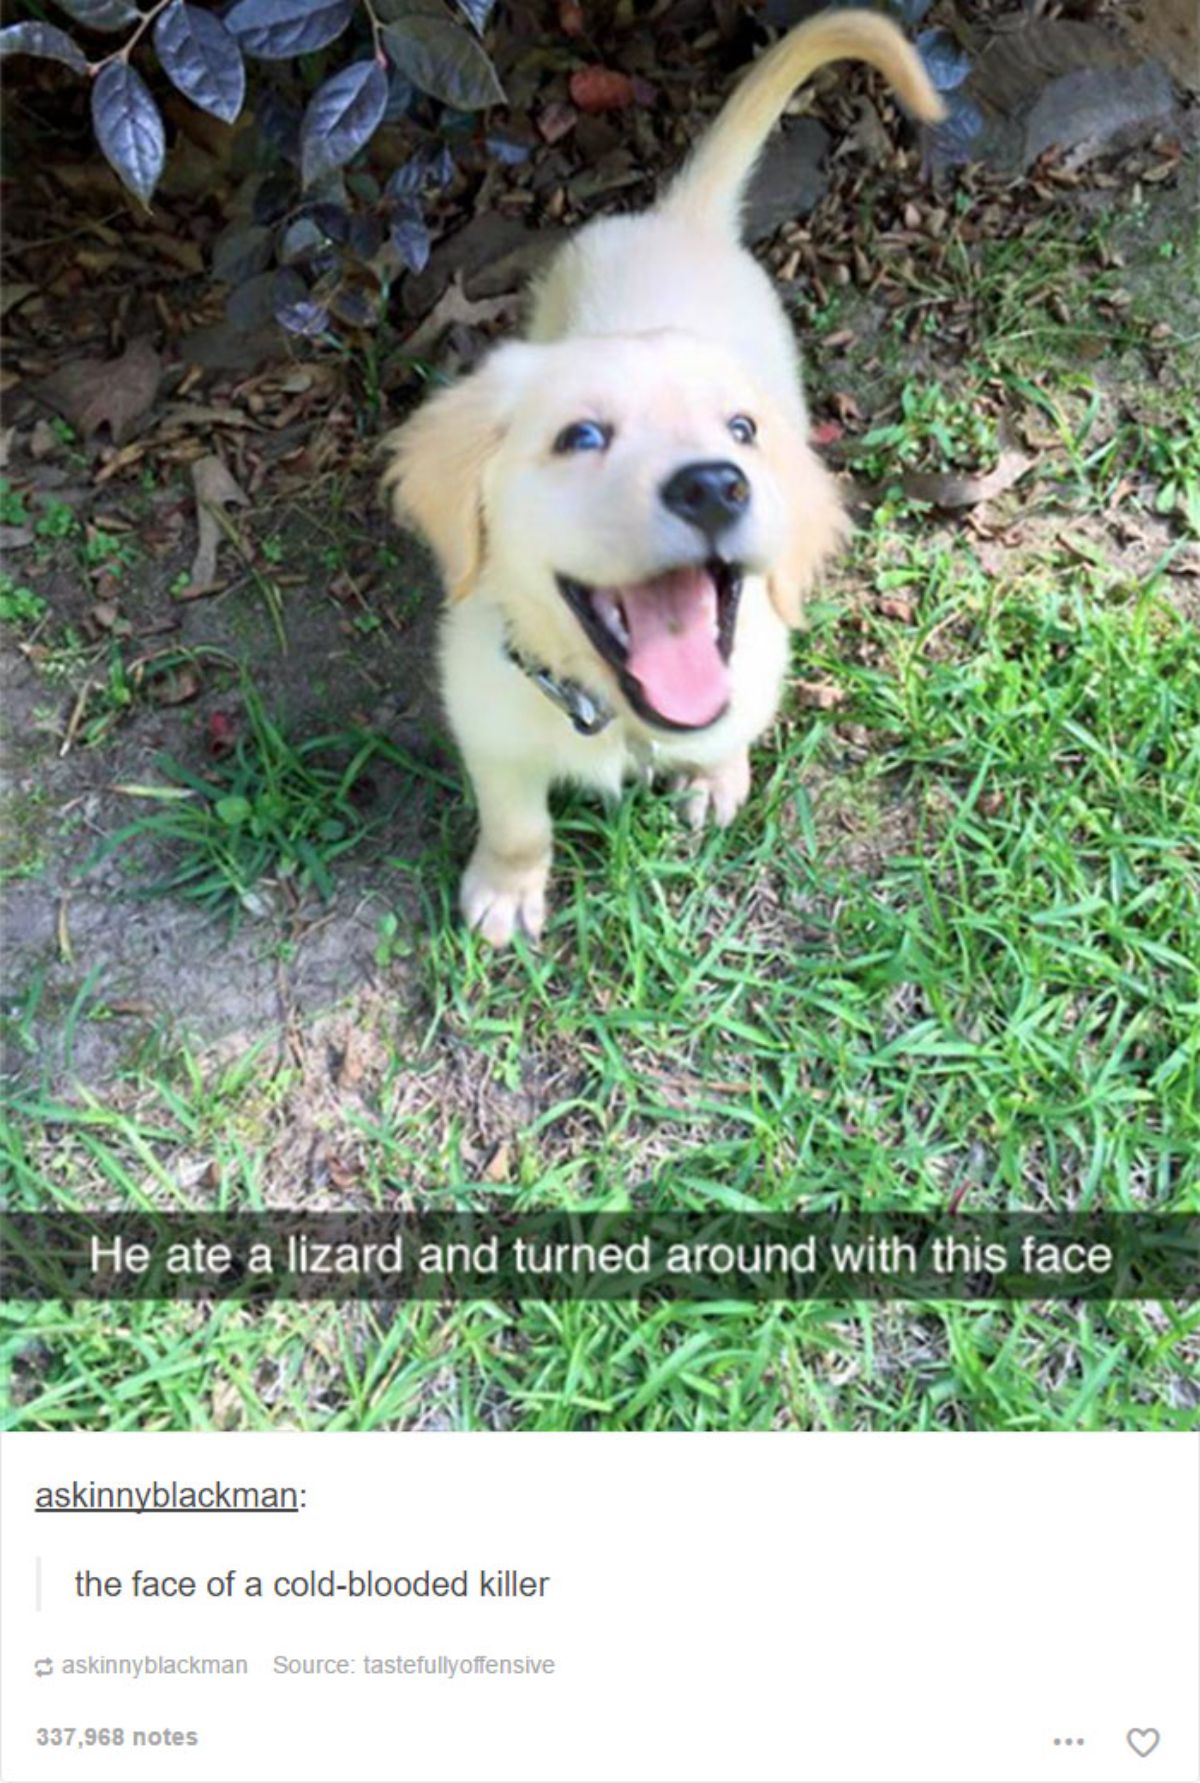 tumblr post of smiling golden retriever puppy saying he ate a lizard and made this face, it's the face of a cold-blooded killer